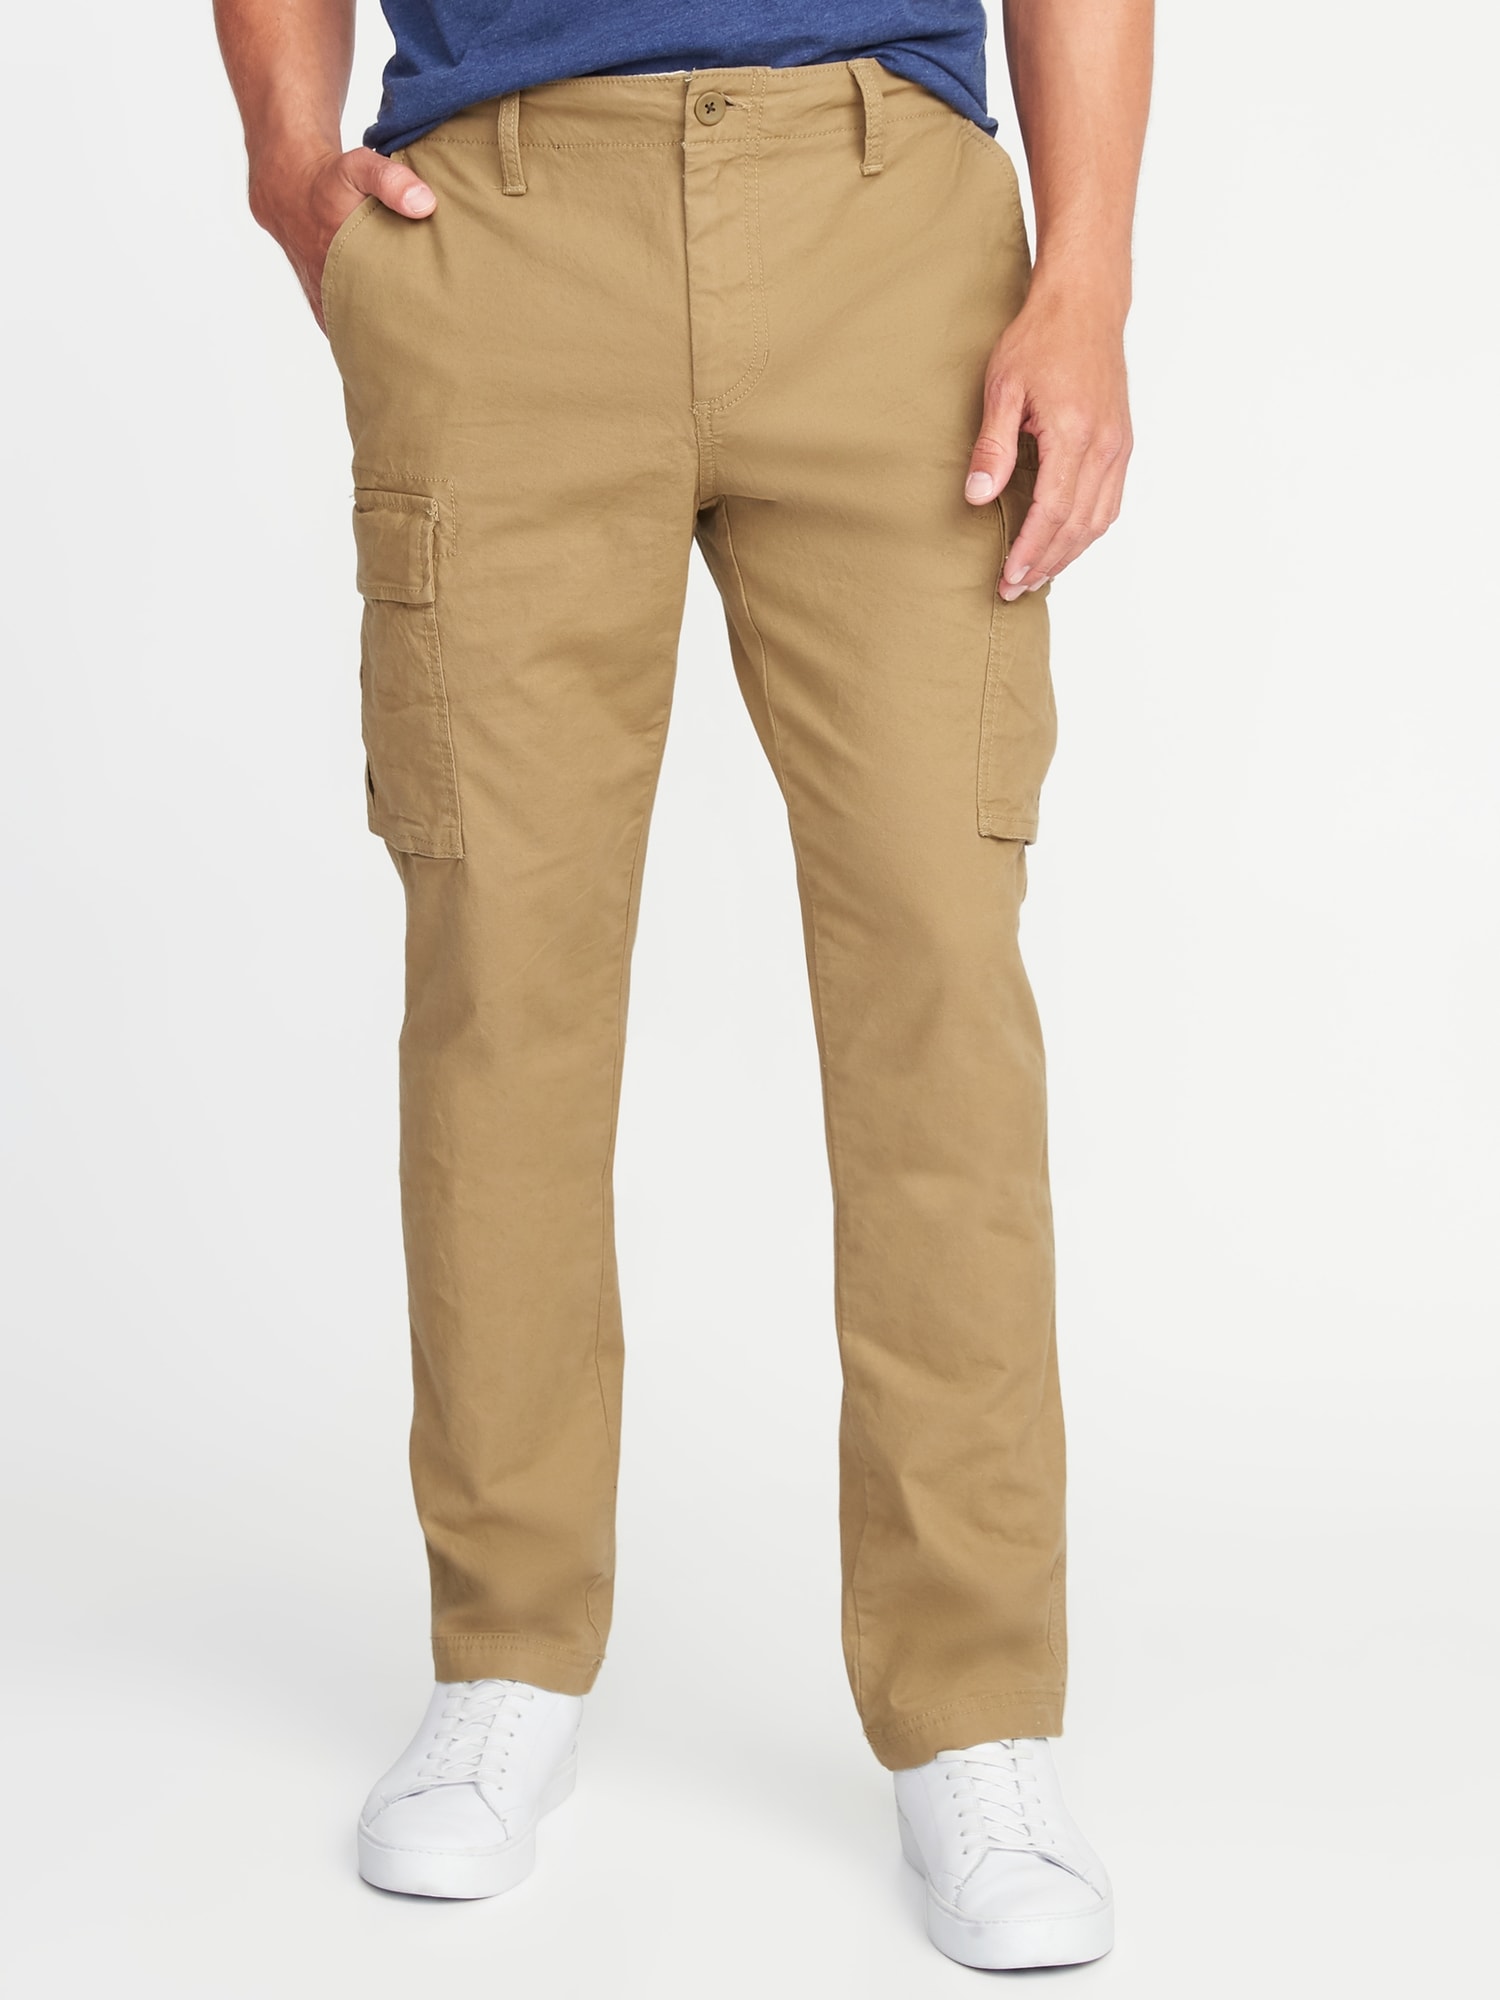 Straight Lived-In Built-In Flex Khaki Cargo Pants | Old Navy